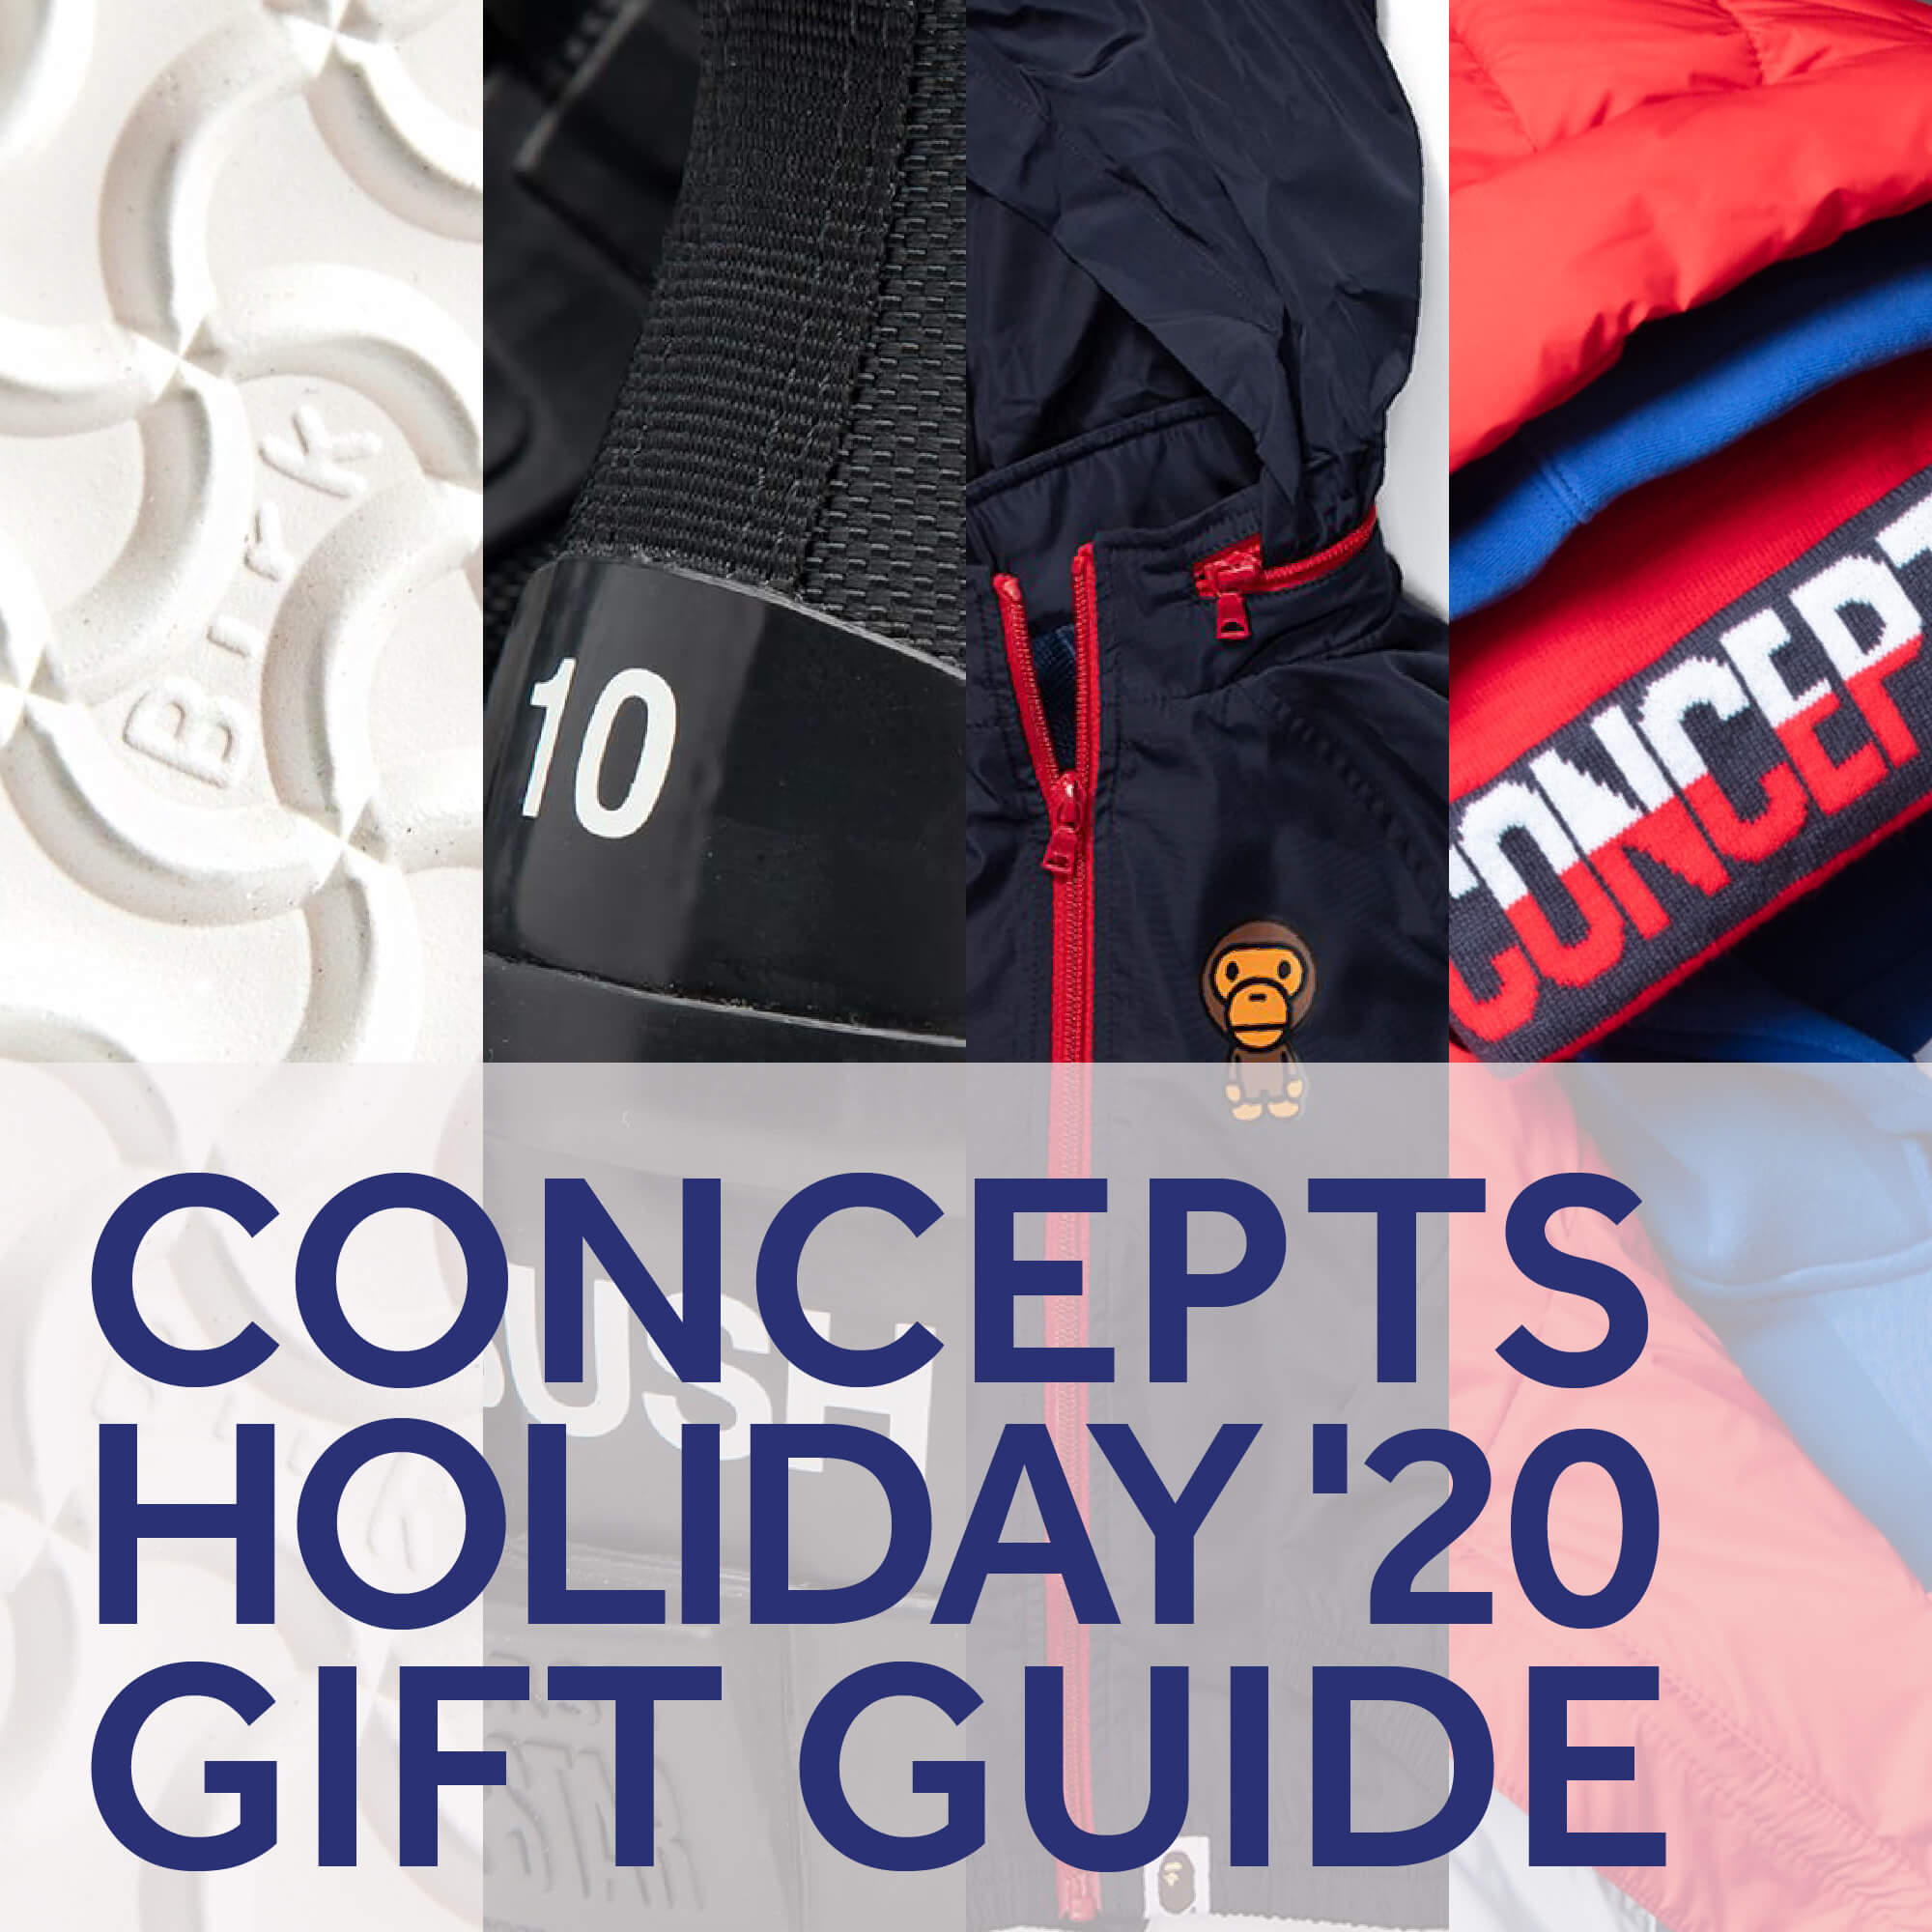 Concepts Holiday 2020 Gift Guide